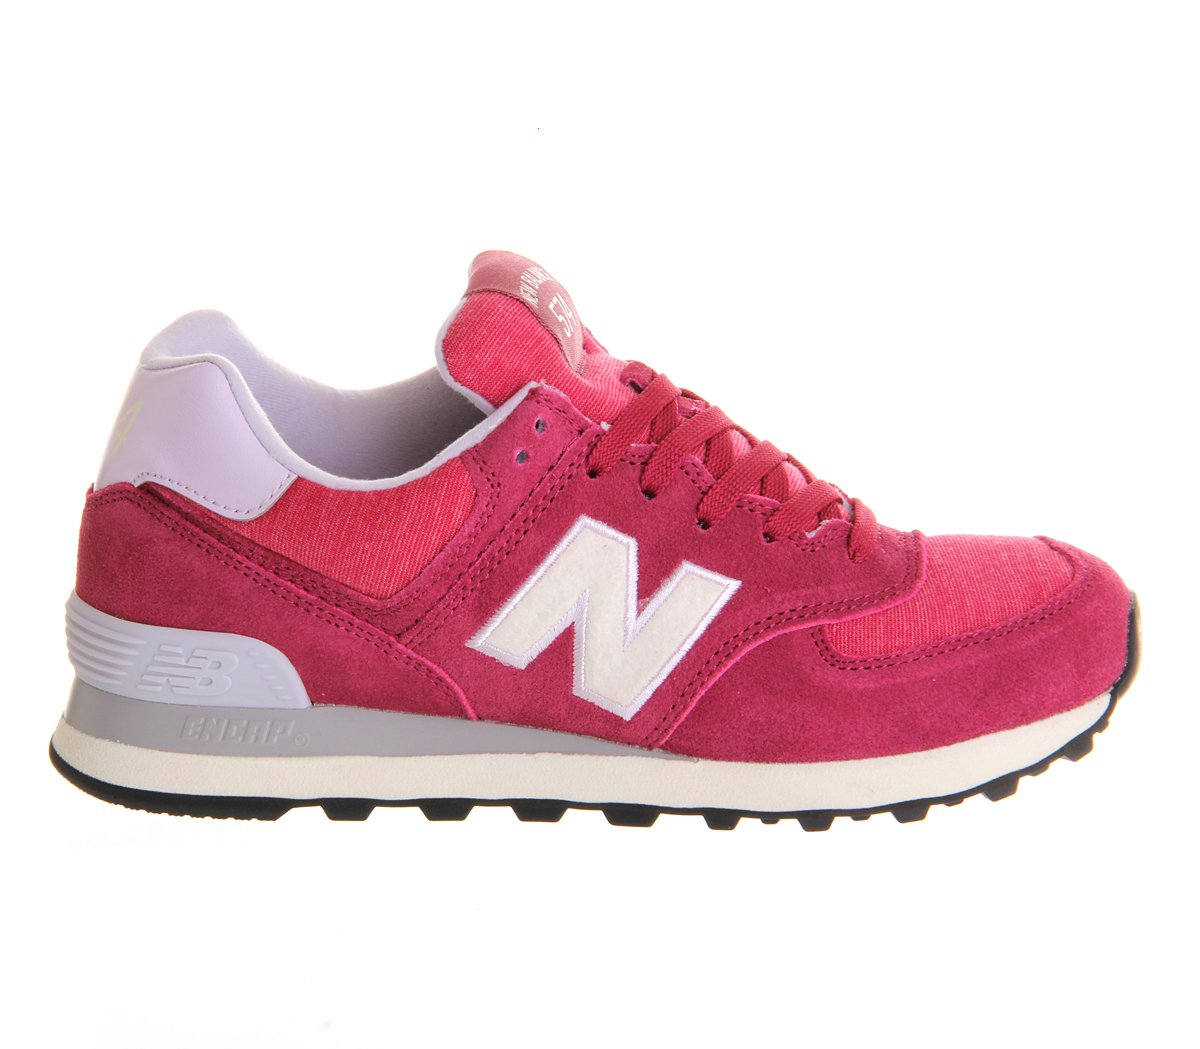 Lyst - New Balance Wl574 in Pink